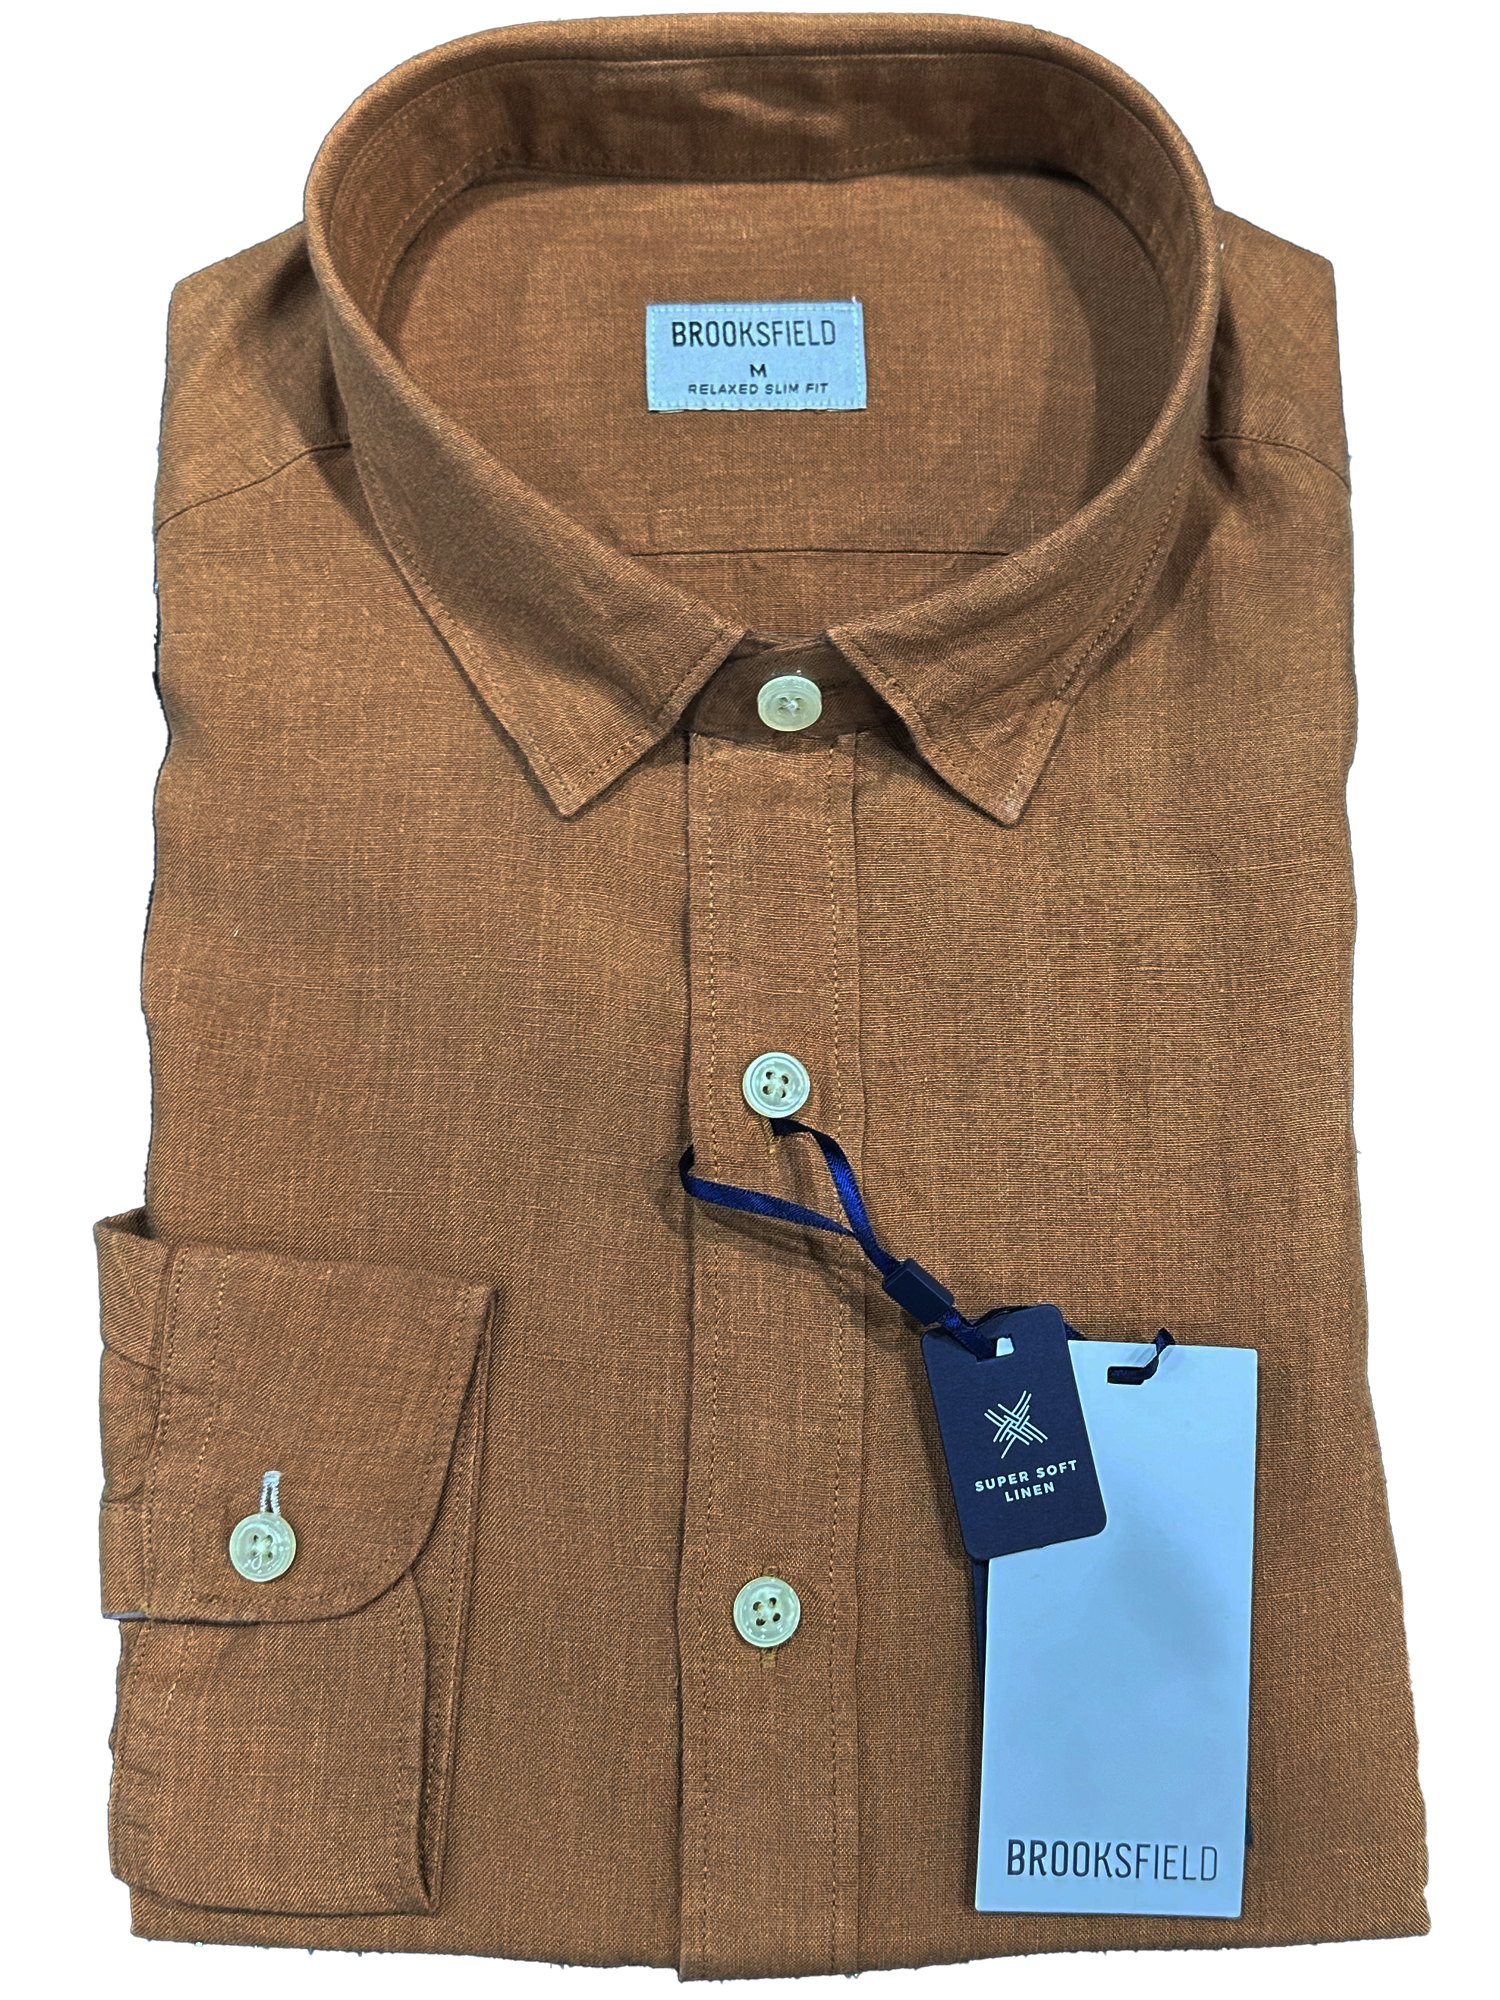 BFS1042 -Casual Linen Blend Shirt L/S  https://harrysformenswear.com.au/products/bfs1042-casual-linen-blend-shirt-l-s  Brookfield Luxe shirts are meticulously made using the finest fabrications and highest quality workmanship. The look is modern and sophisticated with a luxurious touch, creating confidence in wear by being impeccably dressed in every situation. Our fits are tailored to the perfect cut for today's professional man. Feat…